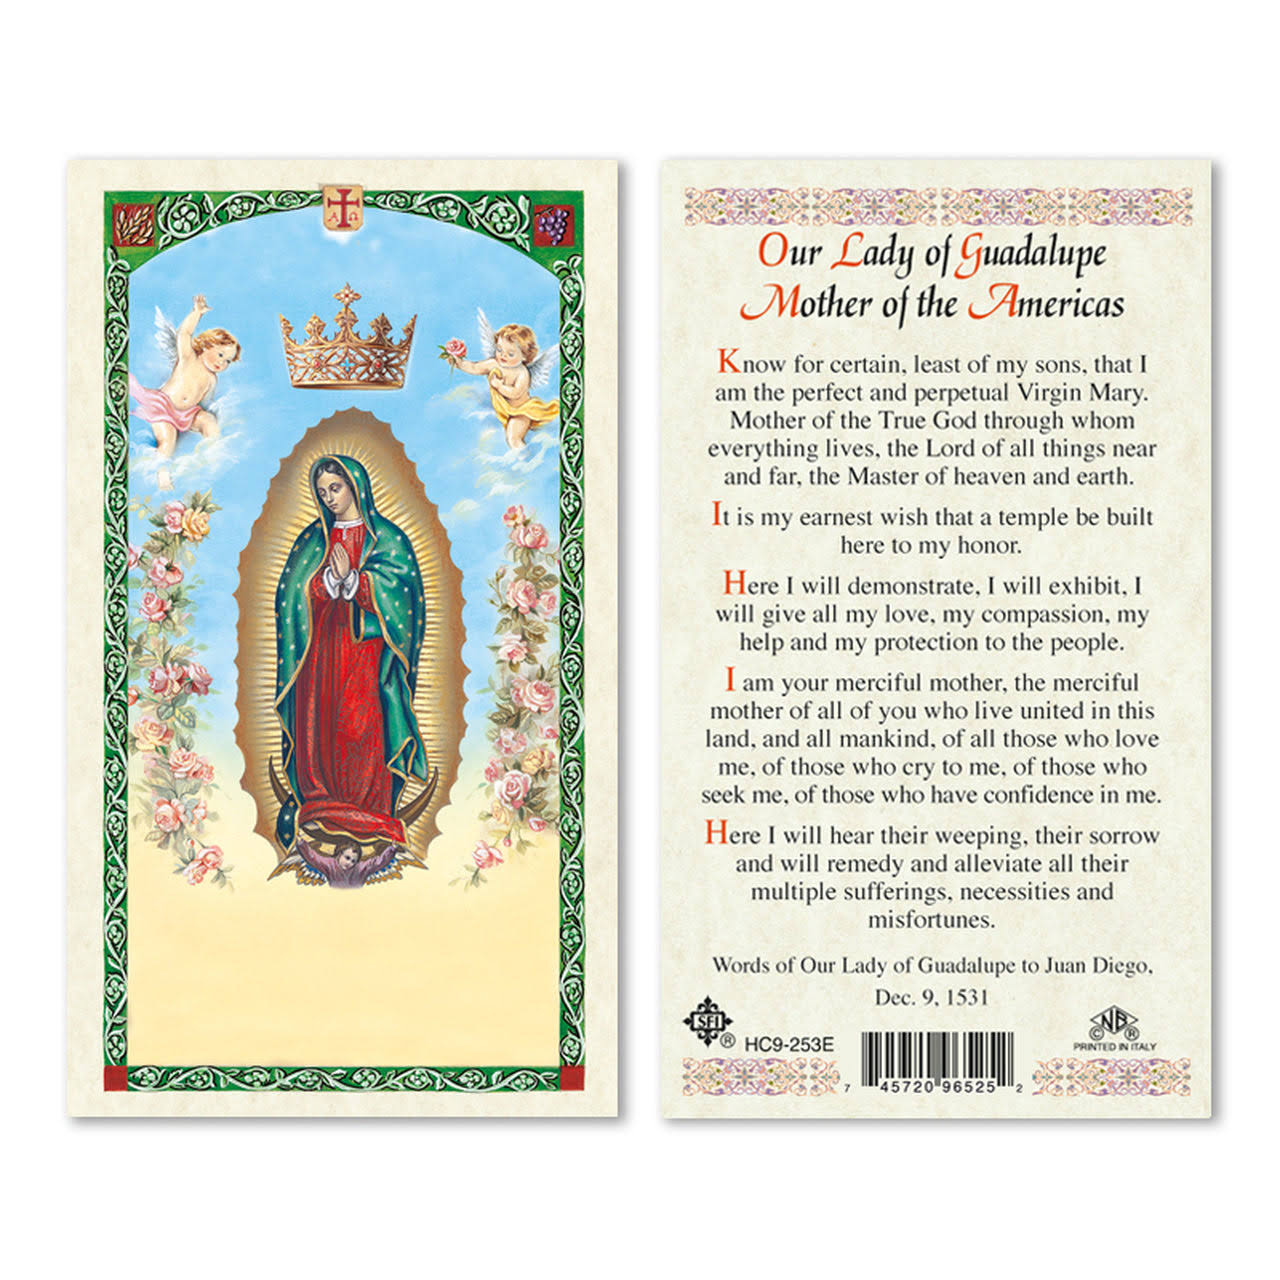 Our Lady of Guadalupe Portrait Laminated Prayer Card-Single from San Francis Imports | Discount Catholic Products